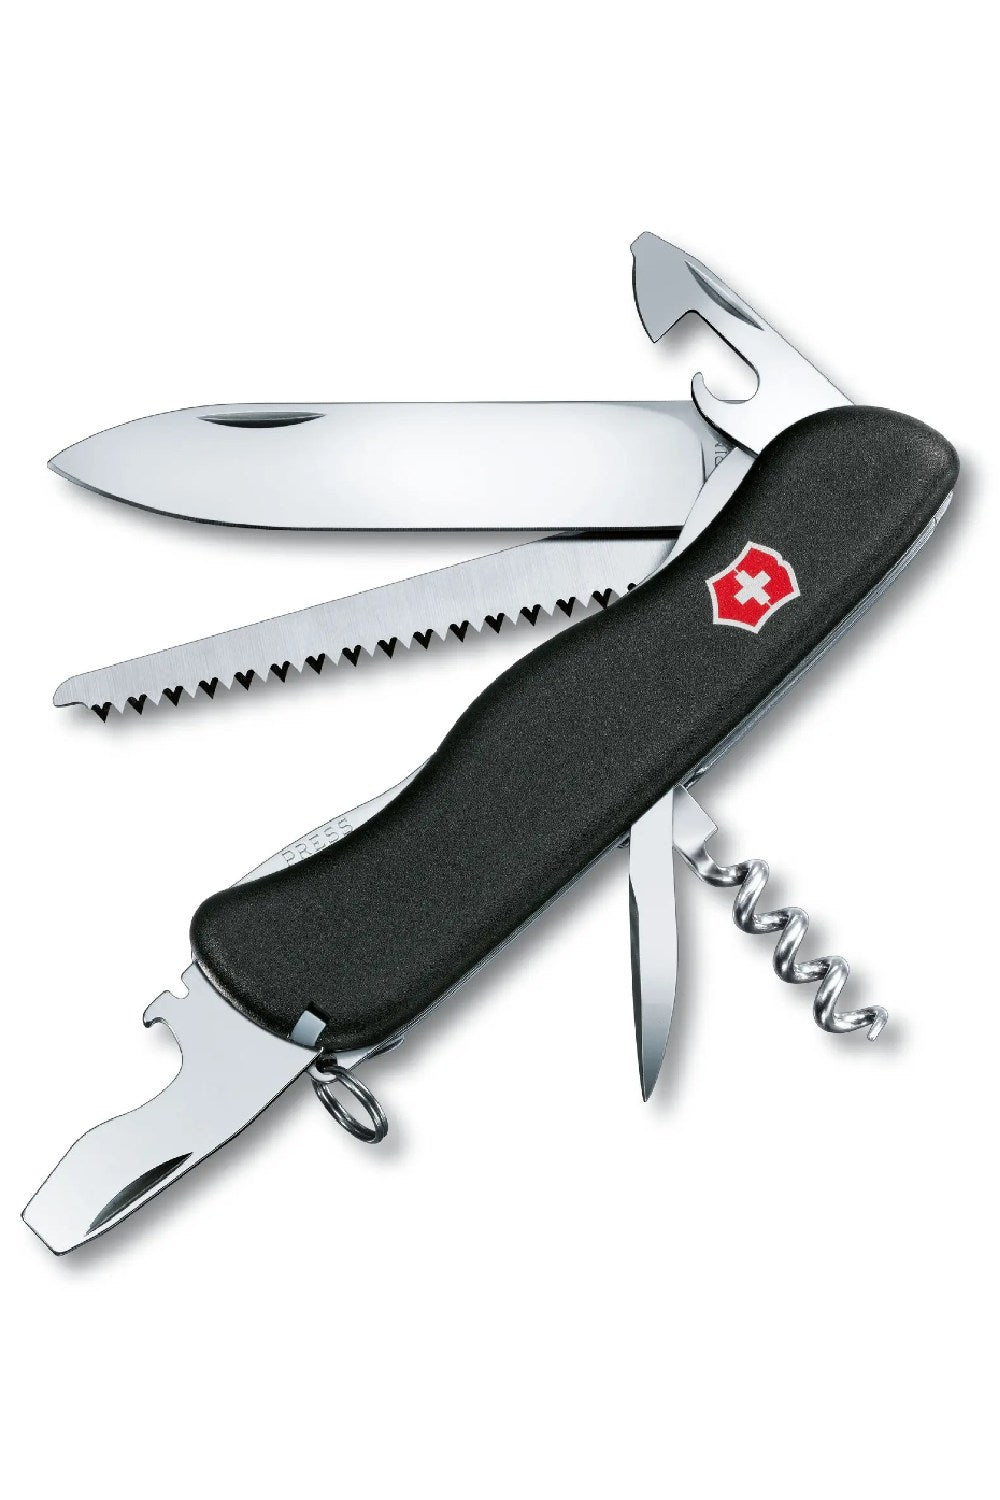 Victorinox Forester Swiss Army Large Pocket Knife with Wood Saw in Black 